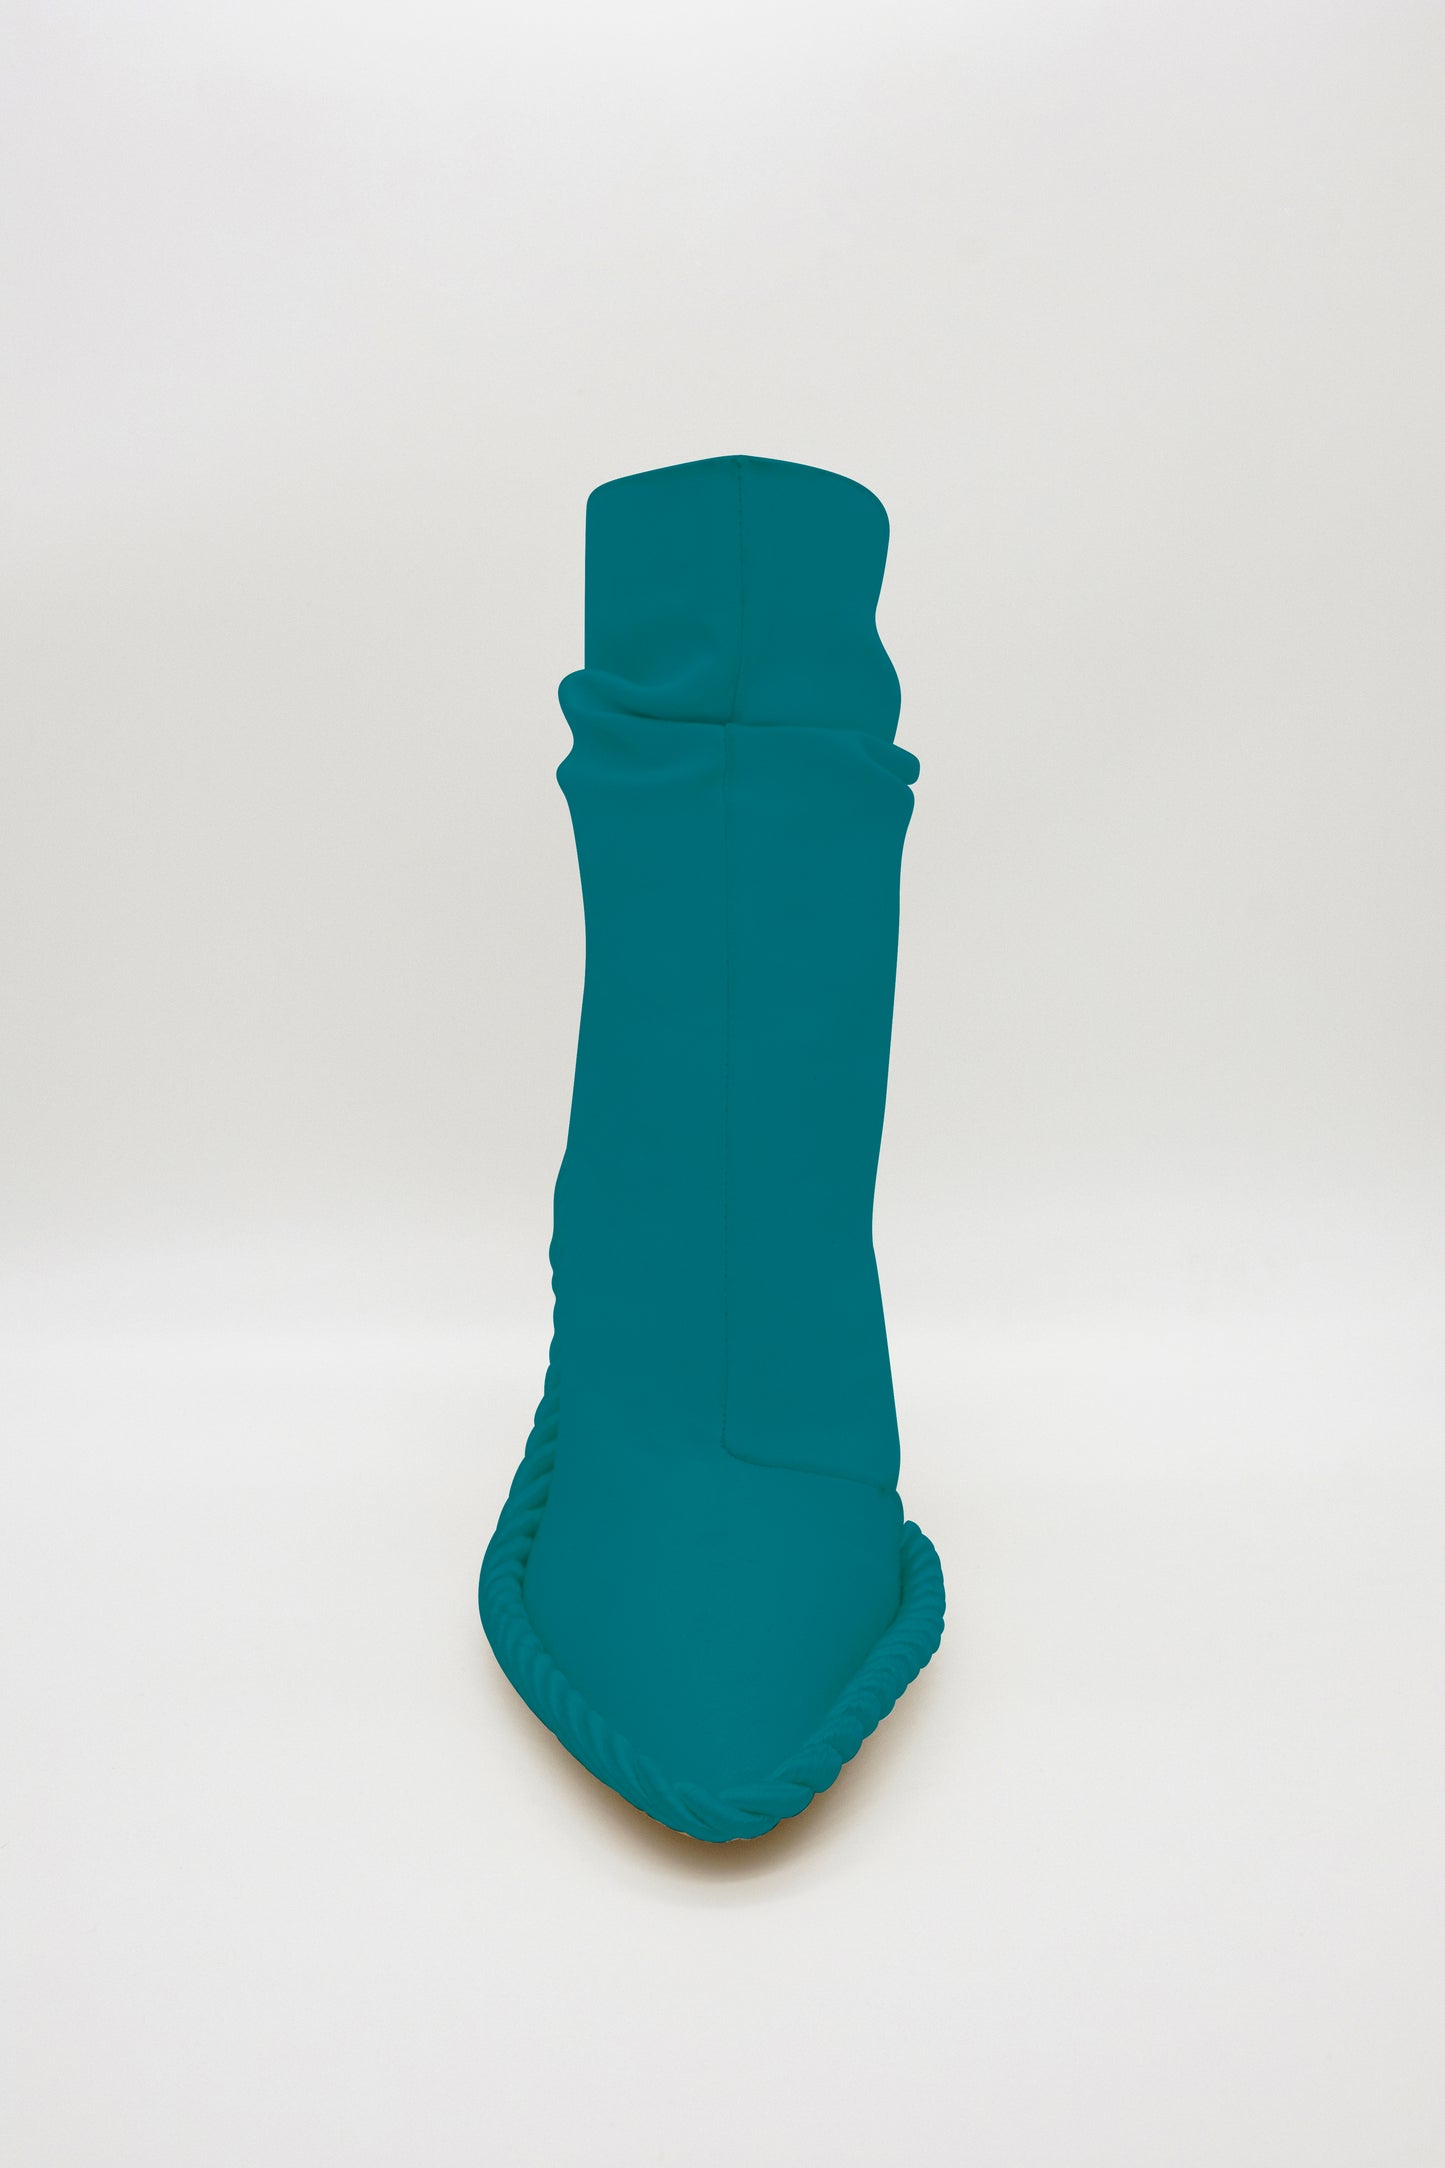 Retoricale Cable Boot in Teal